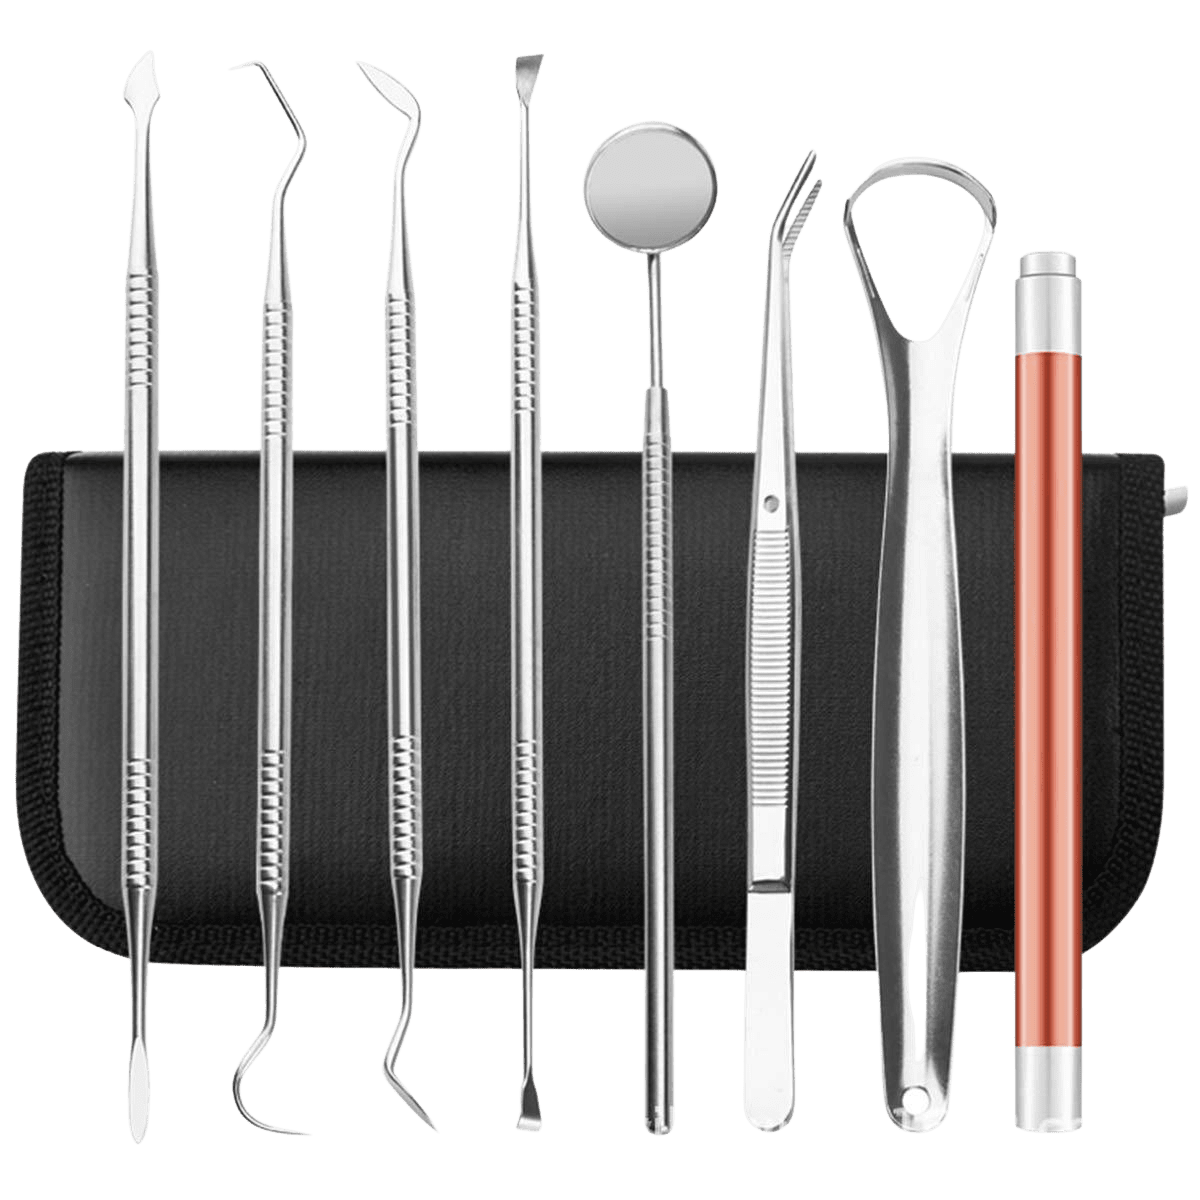 Dental Tools, 8 Pack Teeth Cleaning Tools Professional Stainless Steel Dental Tools with Mouth Mirror, Tweezer, Tongue Scraper, Oral Flashlight, Tartar Scraper for Personal or Pet Oral Care - Home Decor Gifts and More